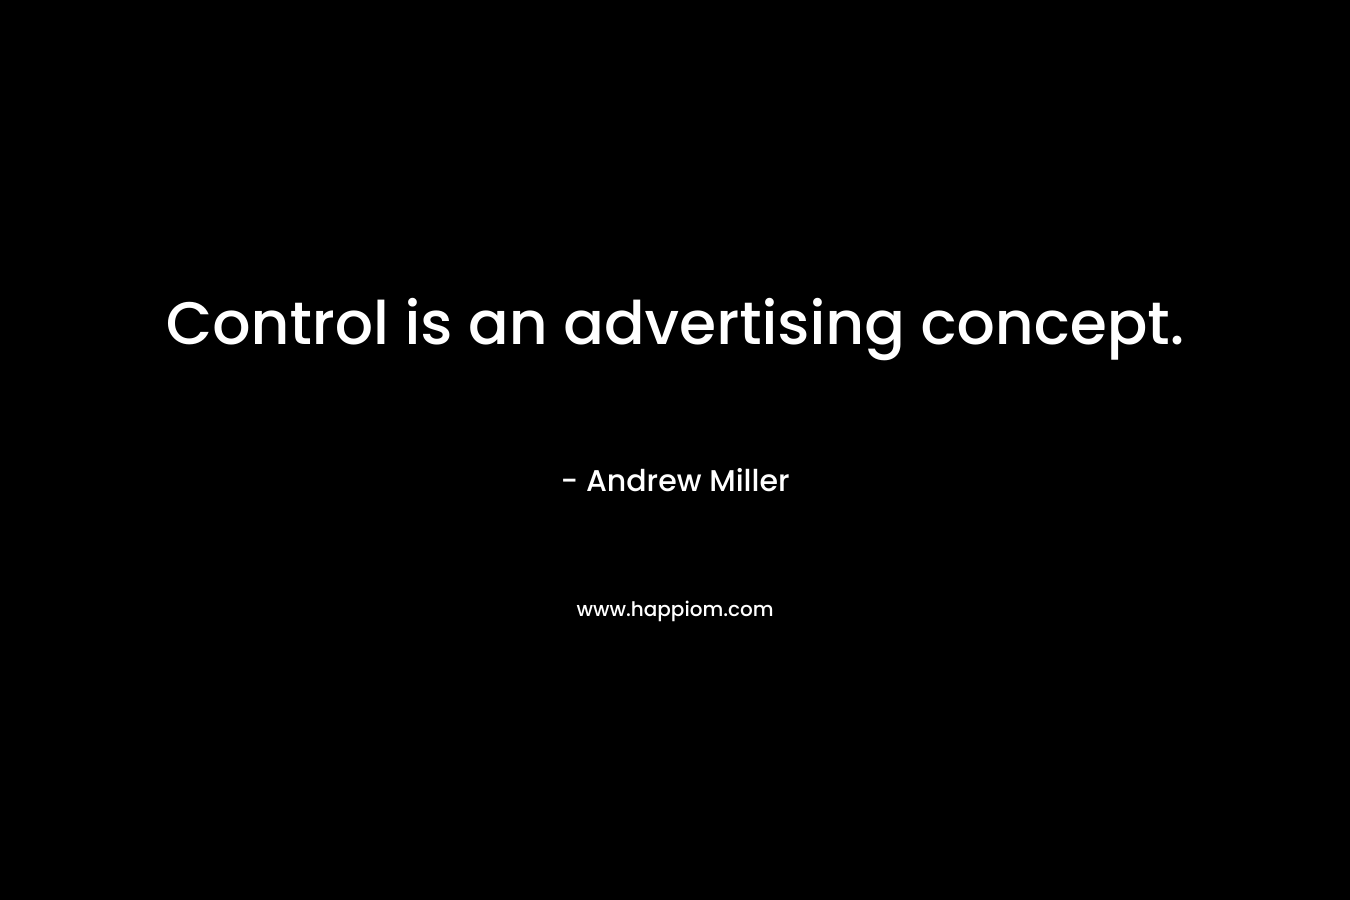 Control is an advertising concept.